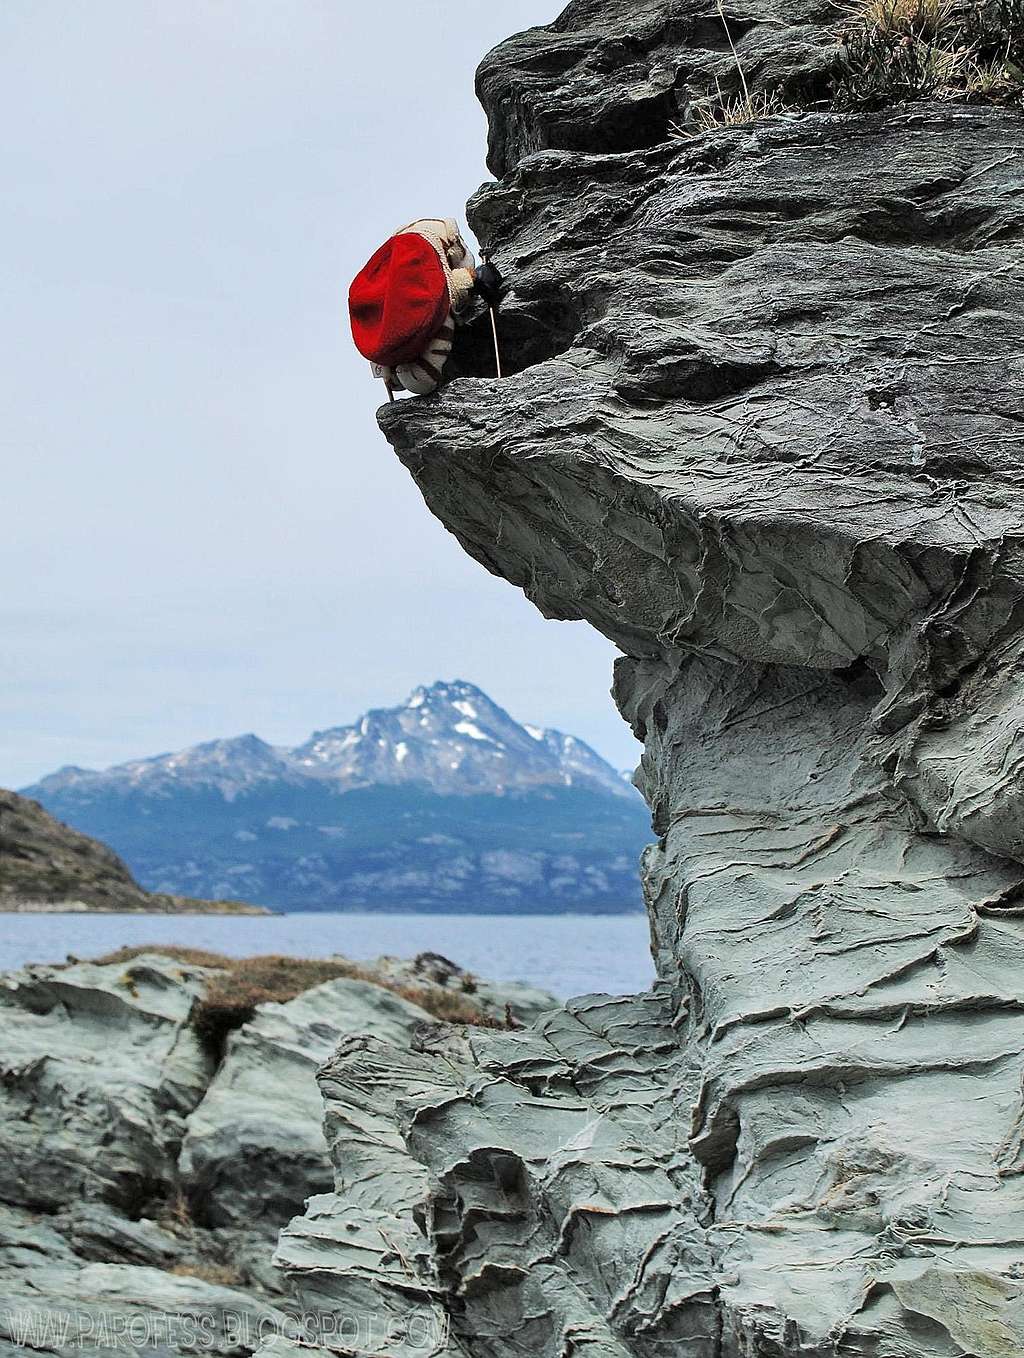 Parfito and some fine rock climbing in Patagonia